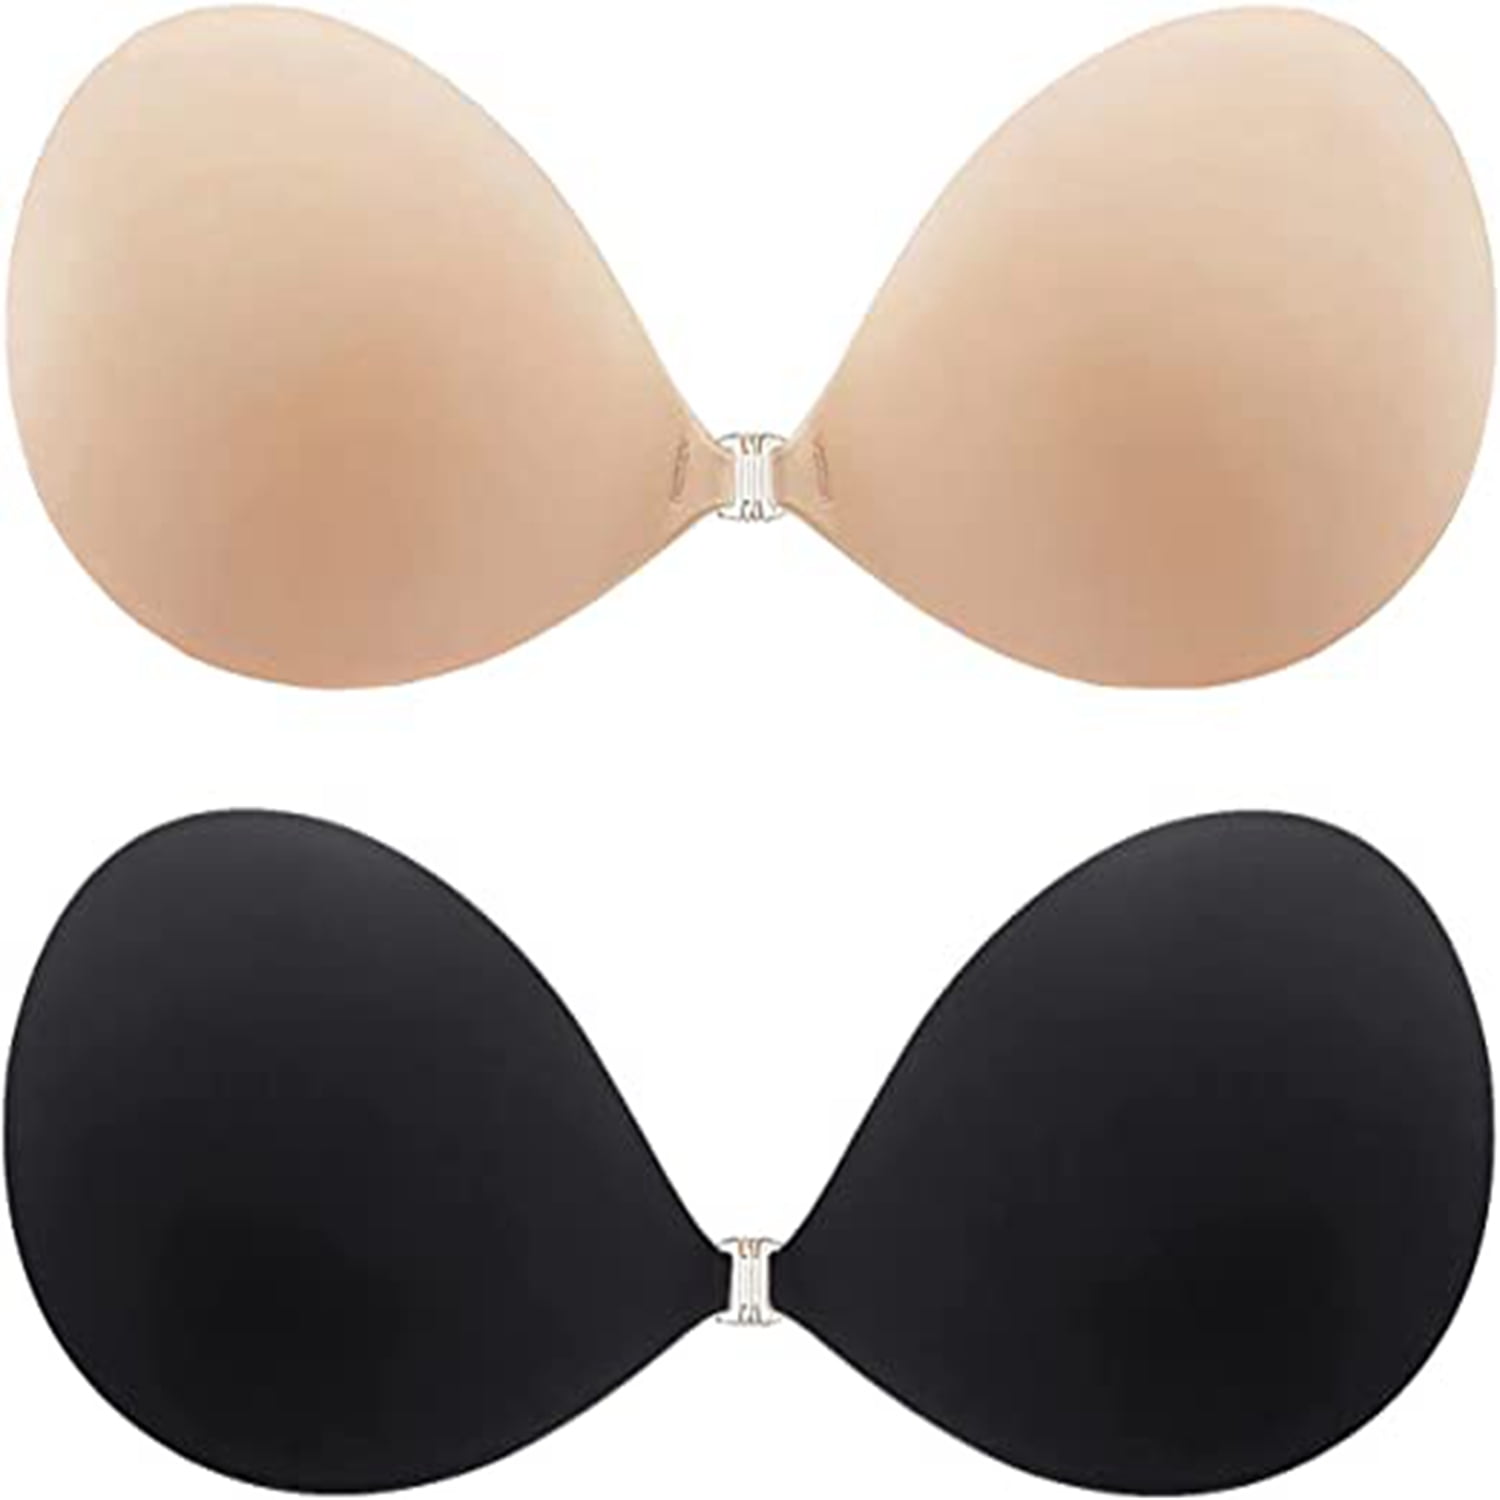 JEFFENLY Bra and Bikini Gel Inserts for Summer Waterproof Silicone Triangle  Push-Up Breast Pads Swimsuit and Bra Inserts Enhancement Falsies Bikini Pads  